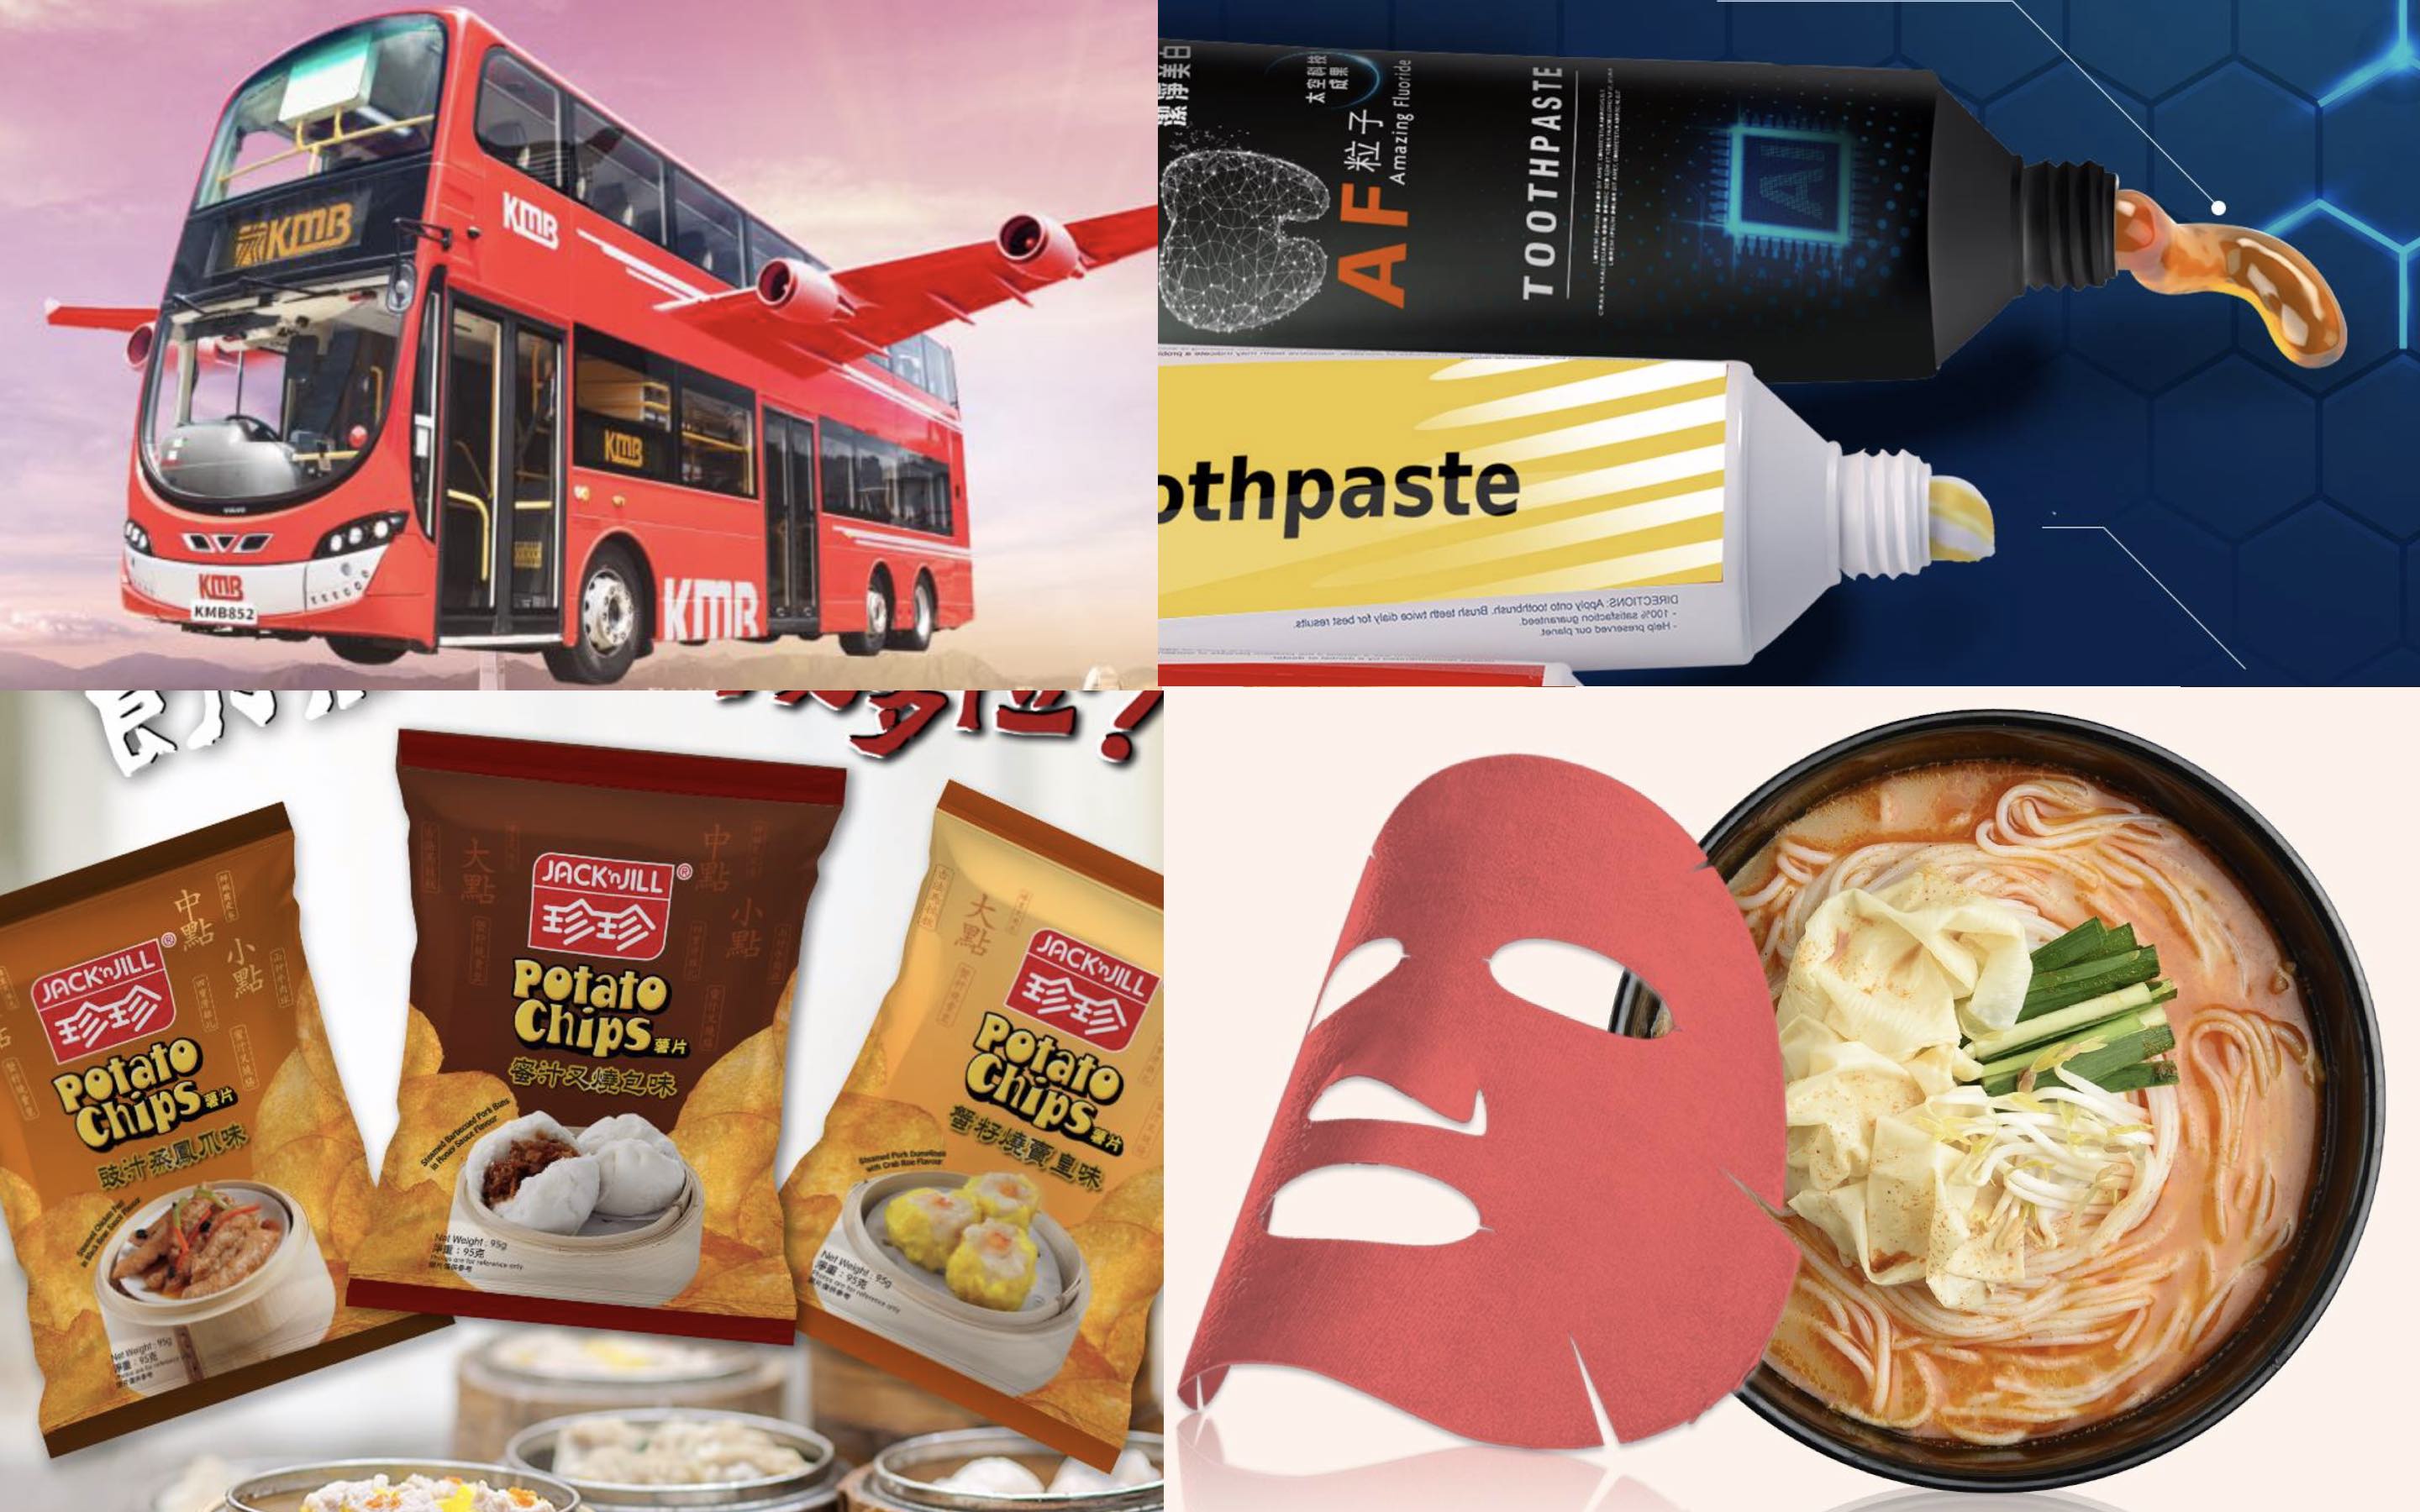 (From top left, clockwise) Kowloon Motorbus, Sony Hong Kong, Tam Chai noodles, and Jack N Jill join in on the April Fool’s Day fun. Photos via Facebook/Various.